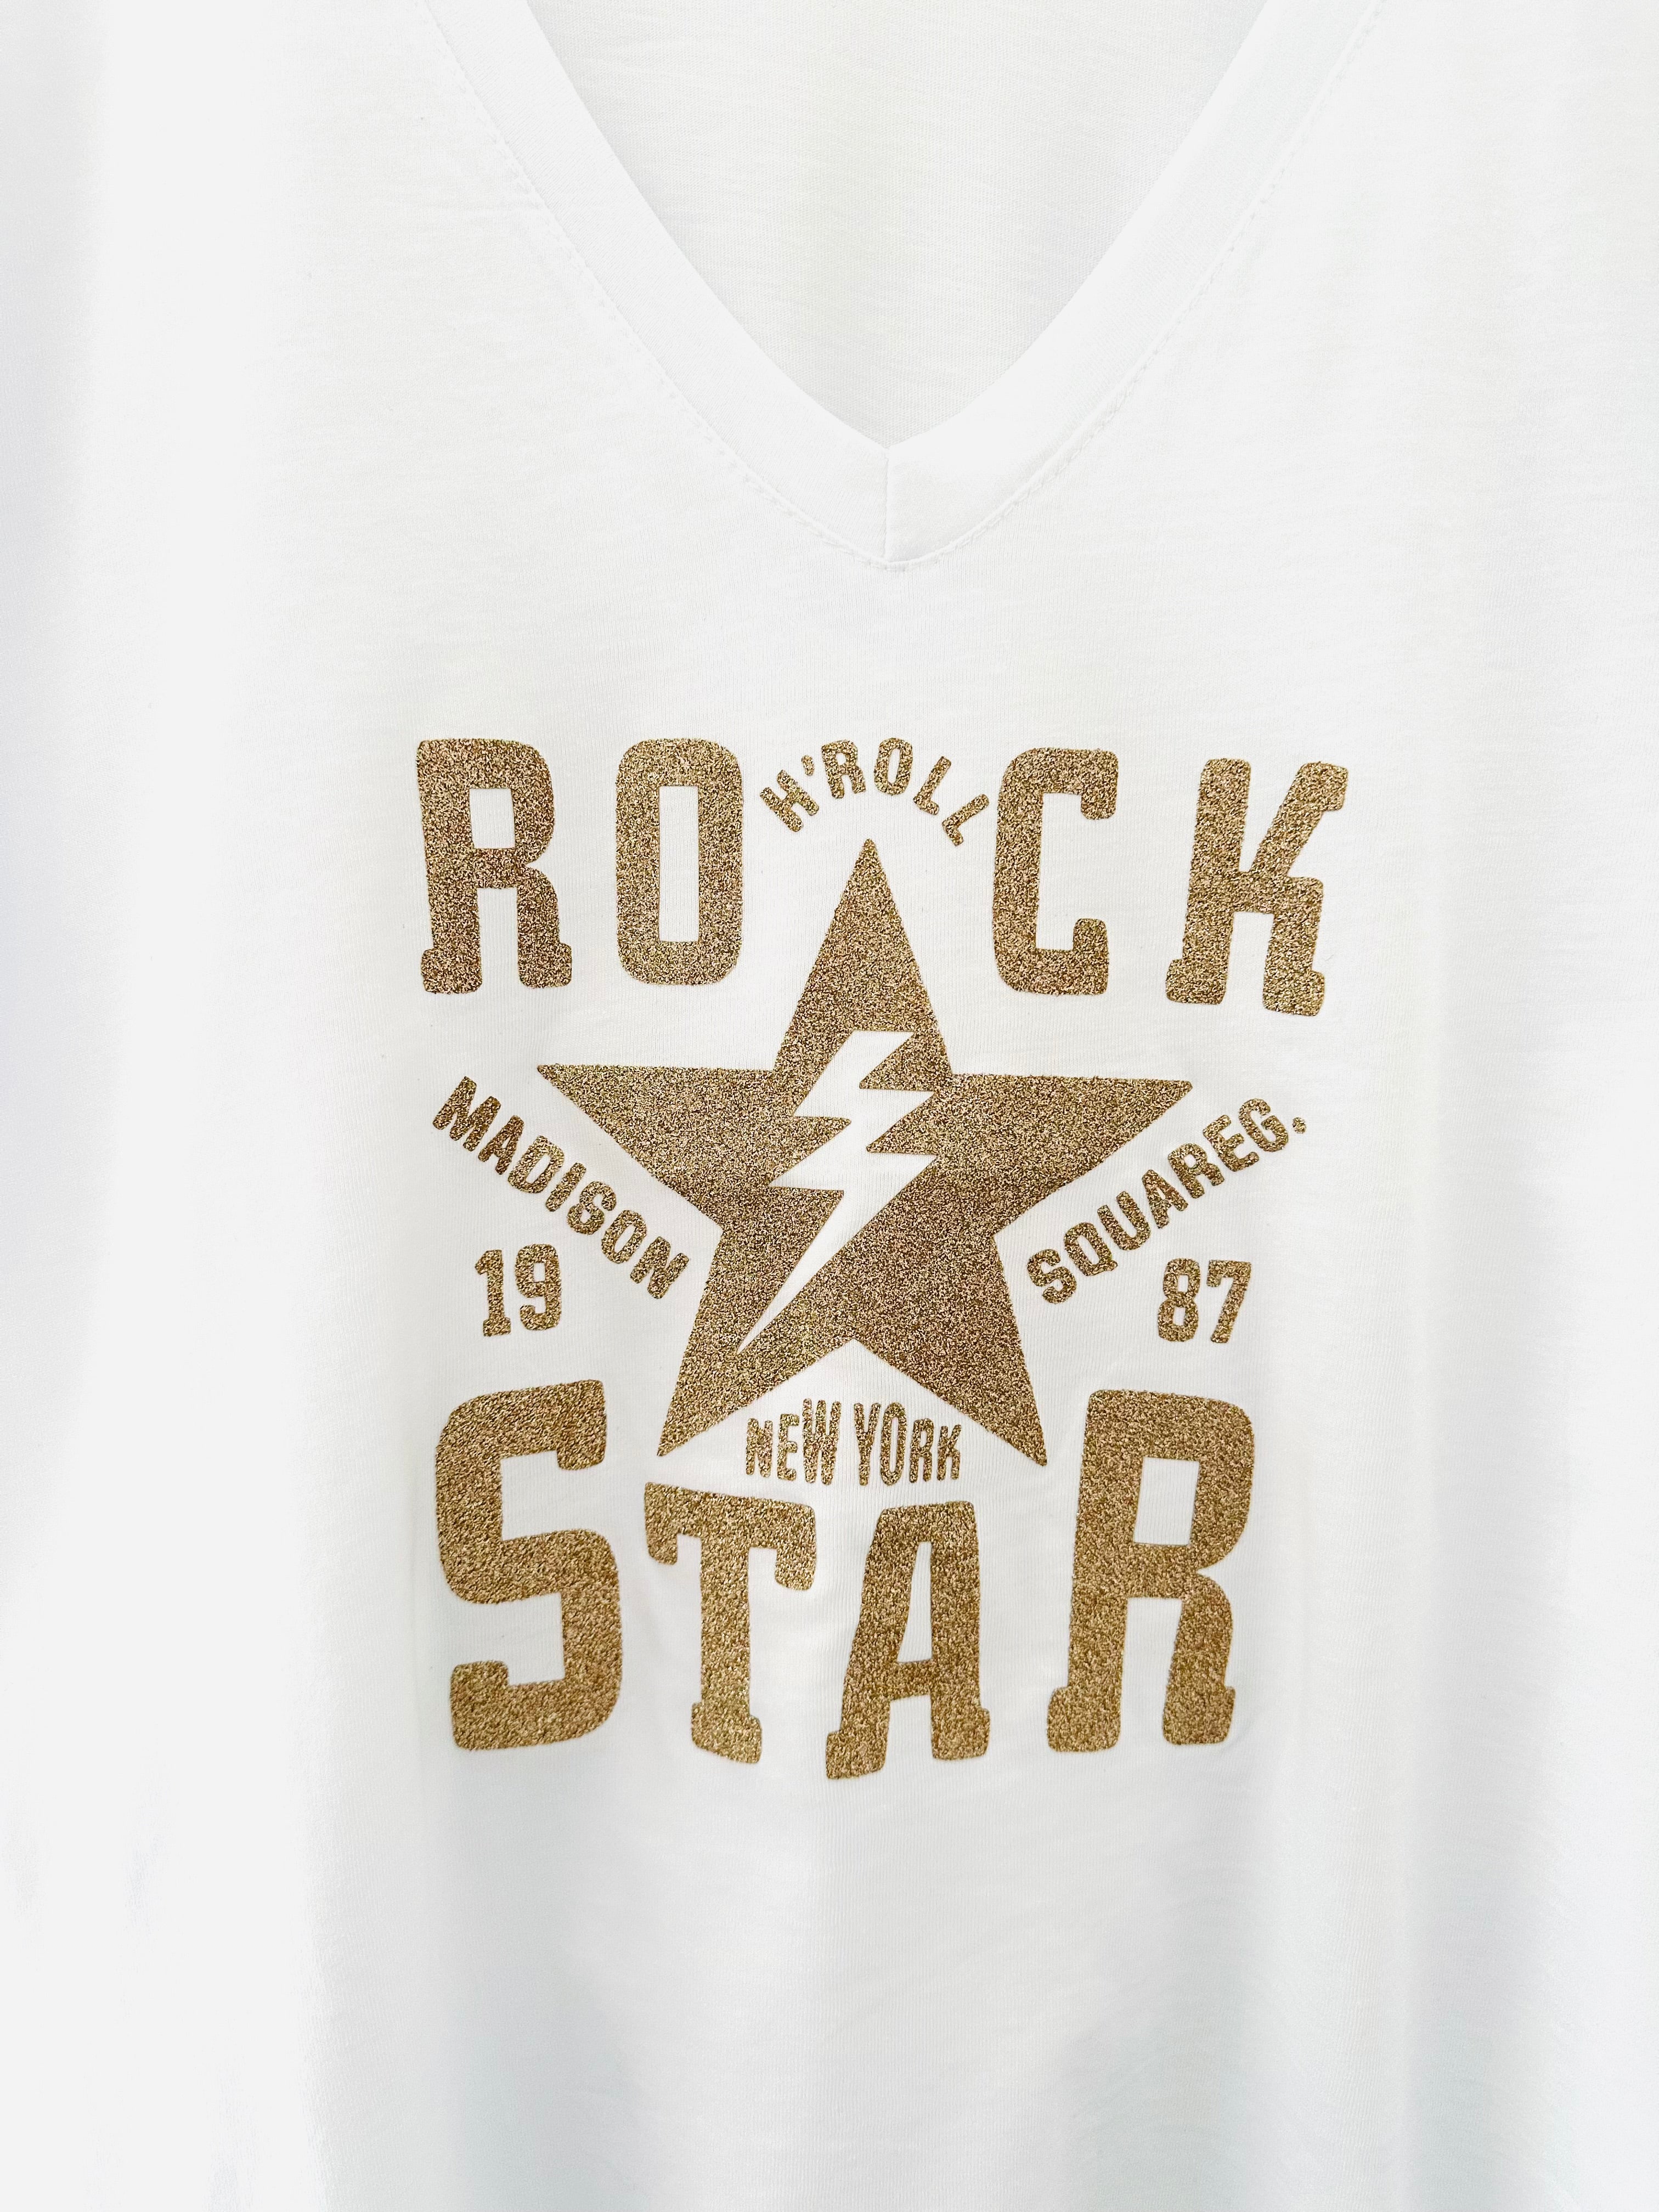 Rock Tee in White & Gold Sparkle